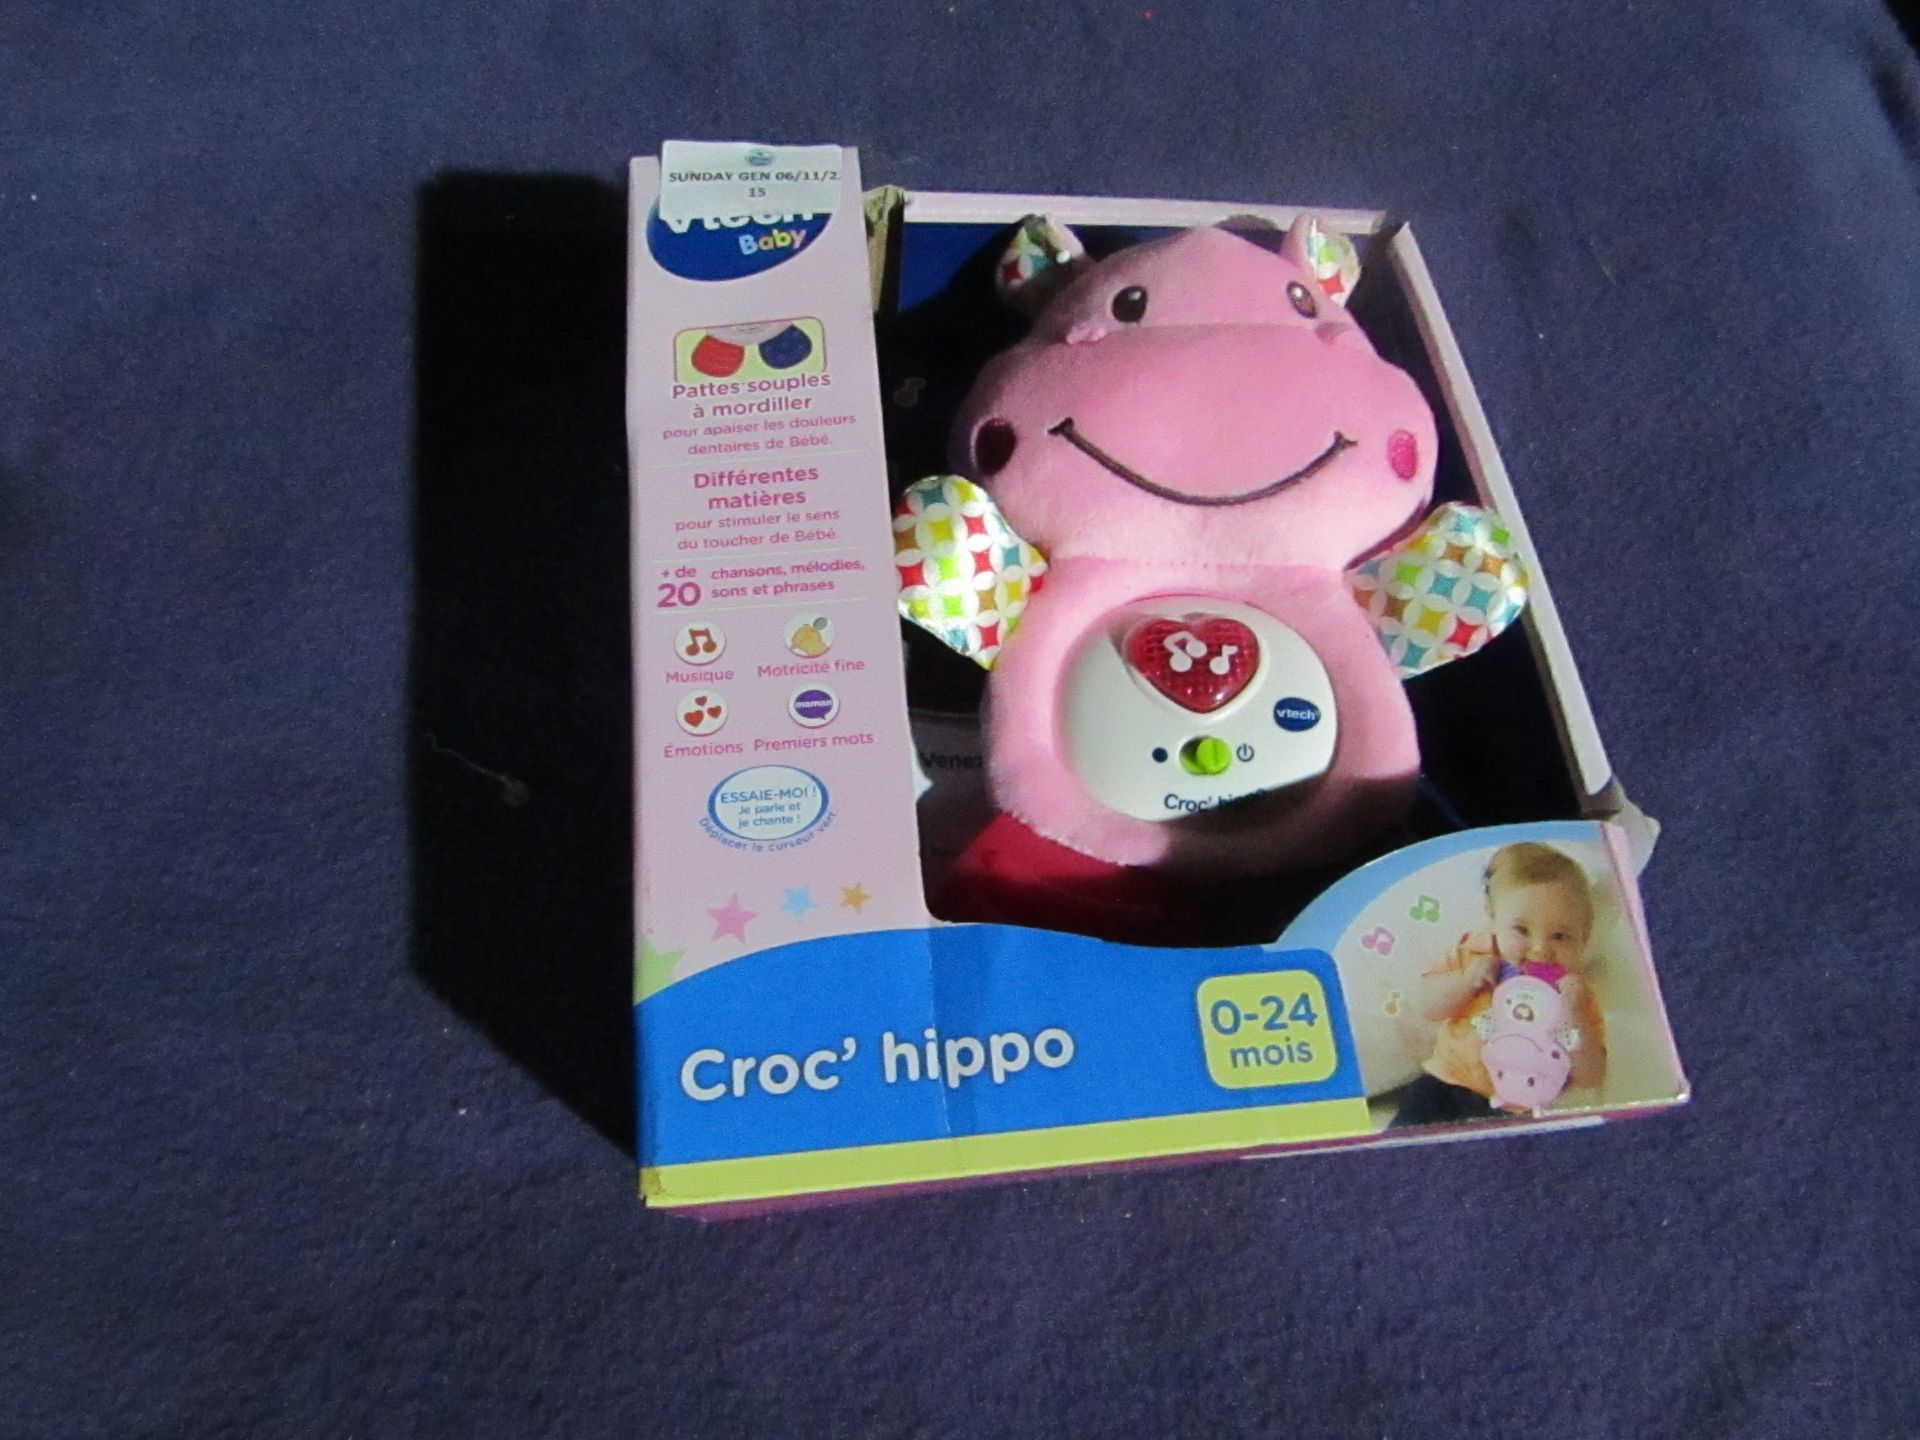 Vtech Baby - Croc' Hippo Singing Toy - Item Looks To Be In French Language - Box Damaged.